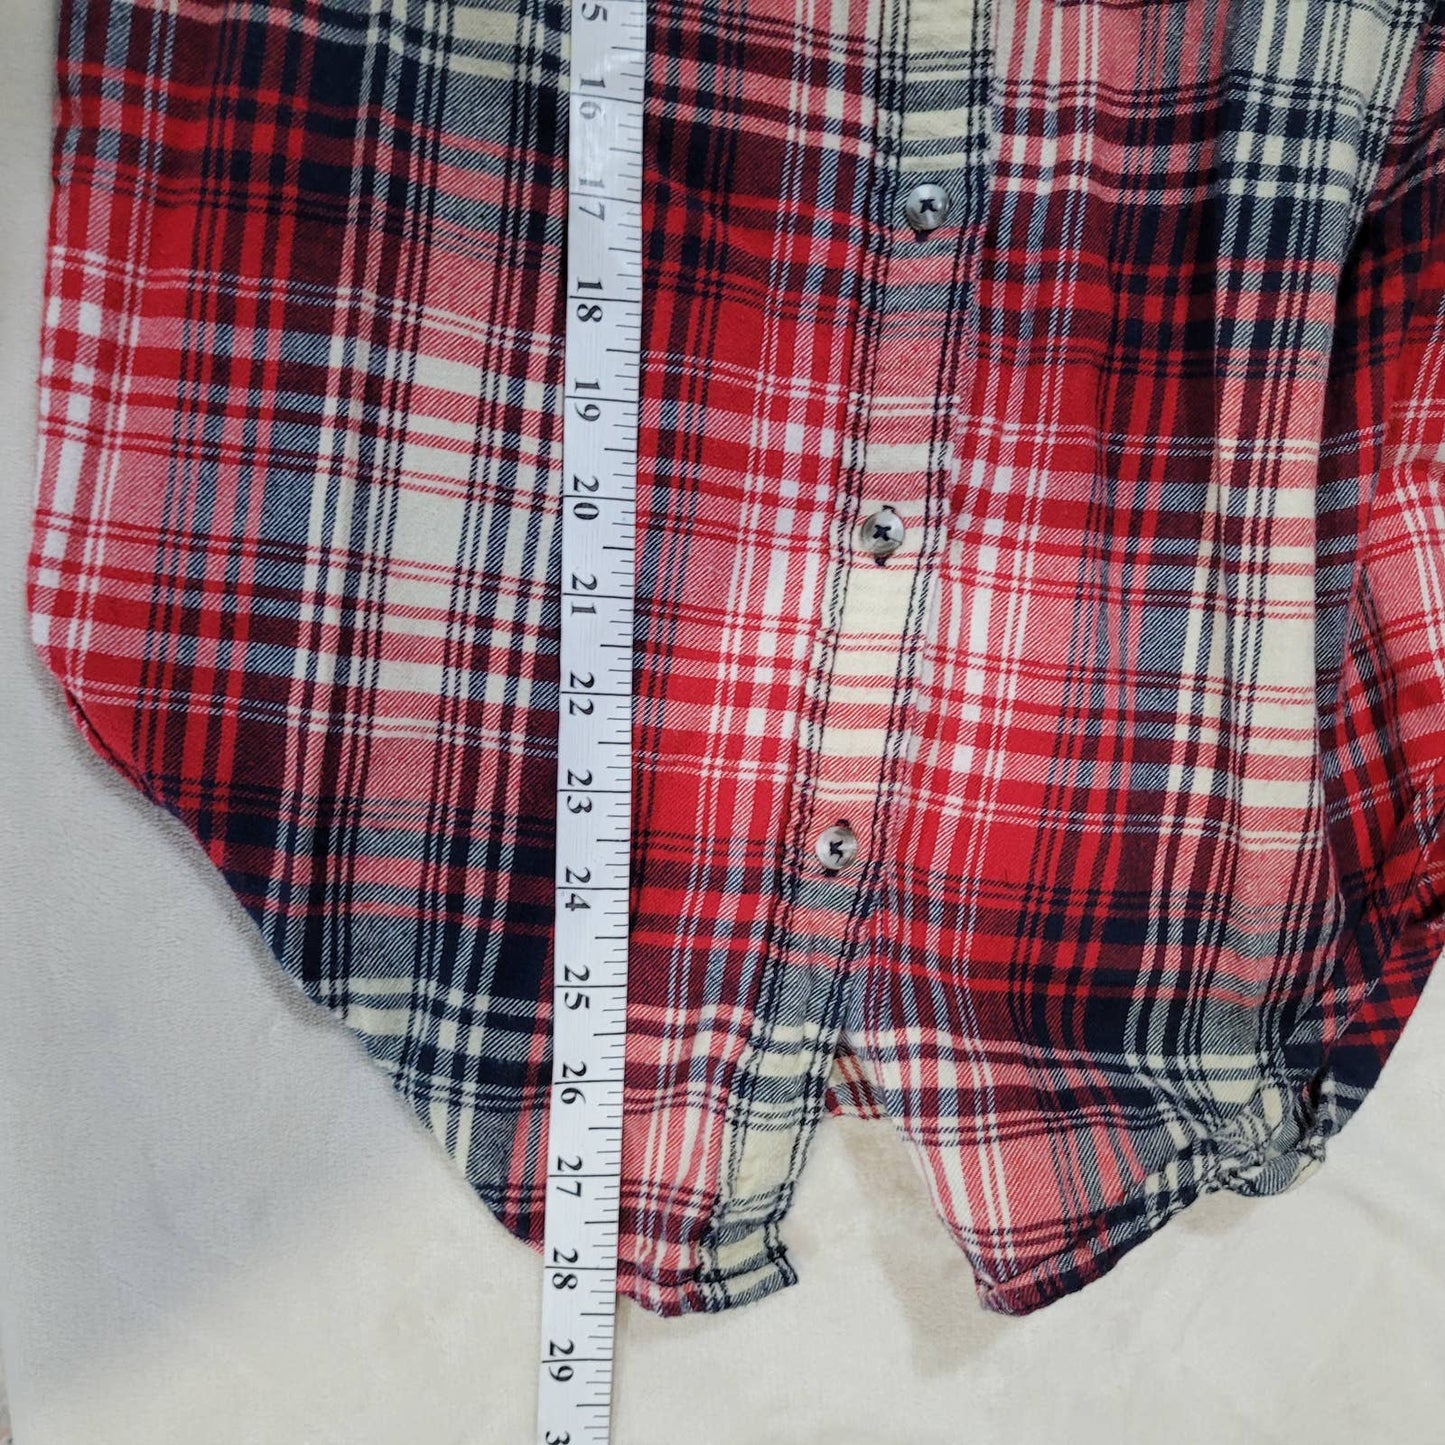 Kavu Billie Jean Button Red and Blue Flannel Plaid Shirt - Size Small